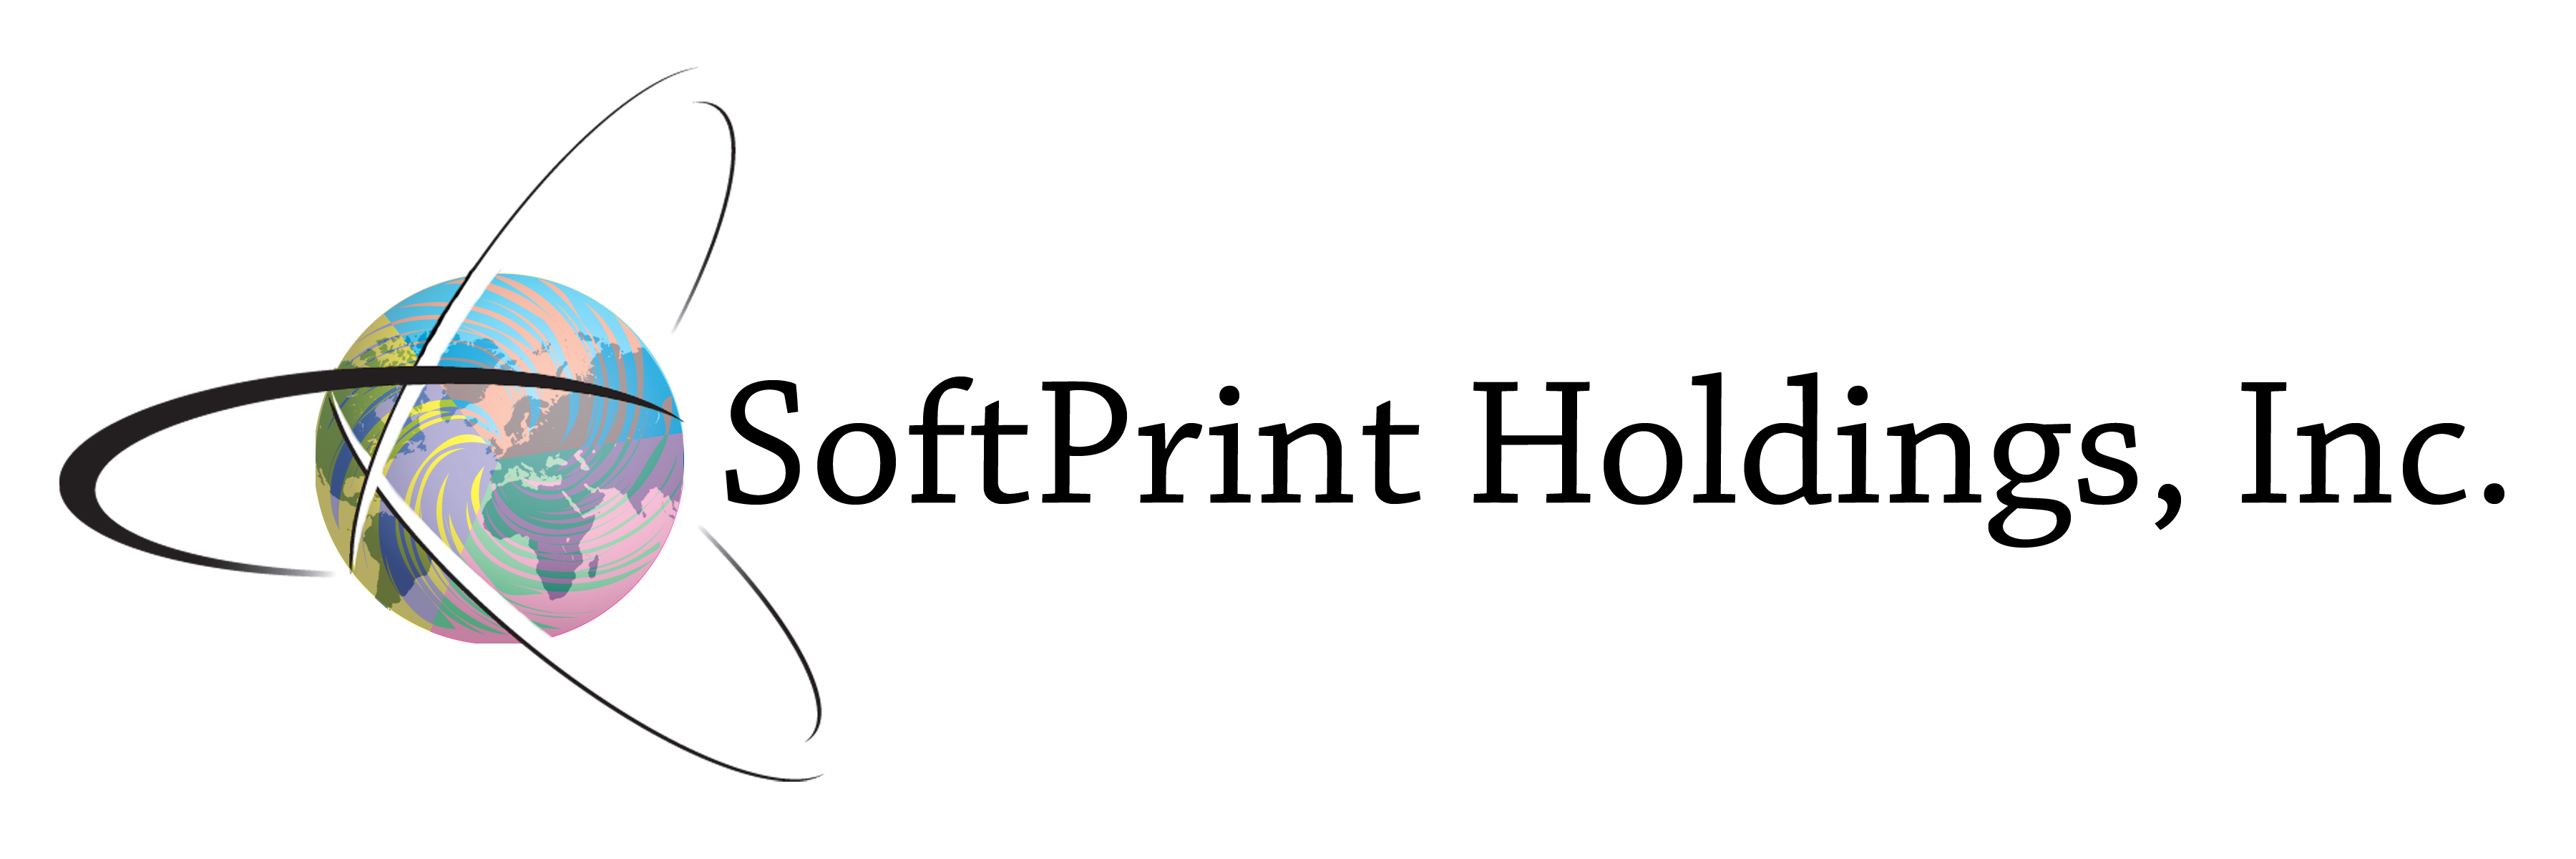 ColorCentric, Picaboo.com, and prInternet™ businesses from SoftPrint Holdings